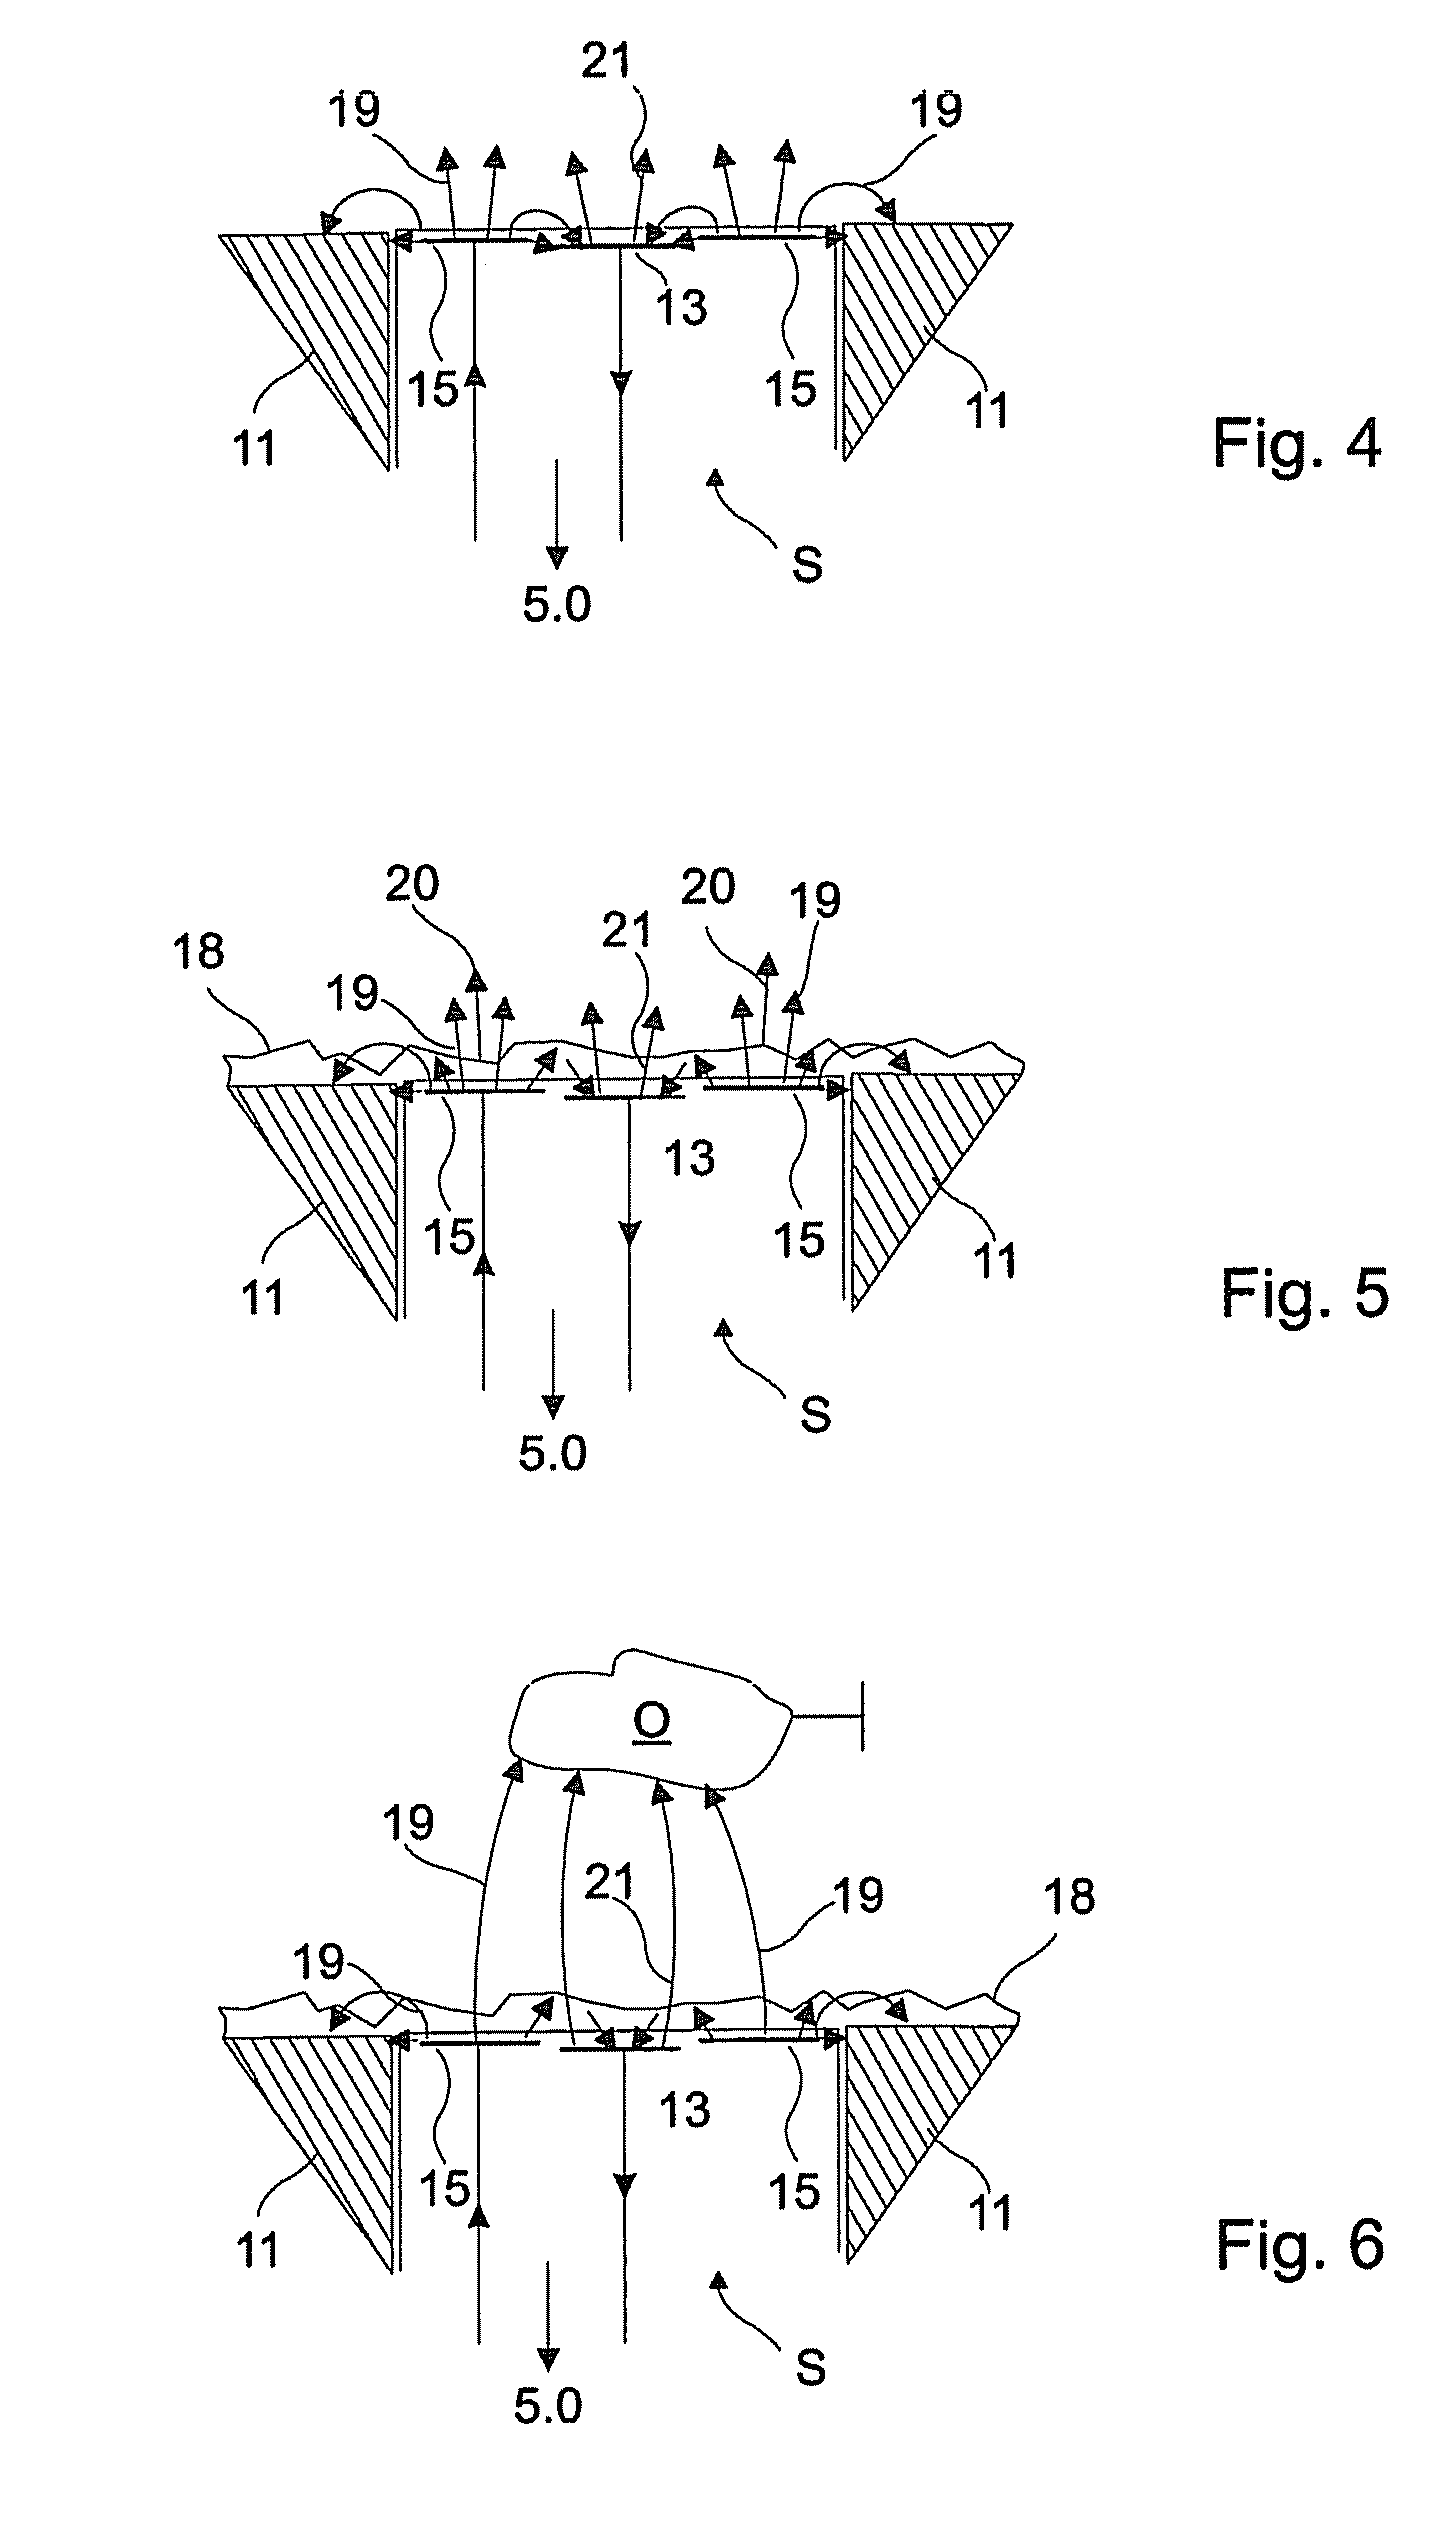 Apparatus for capacitively measuring changes